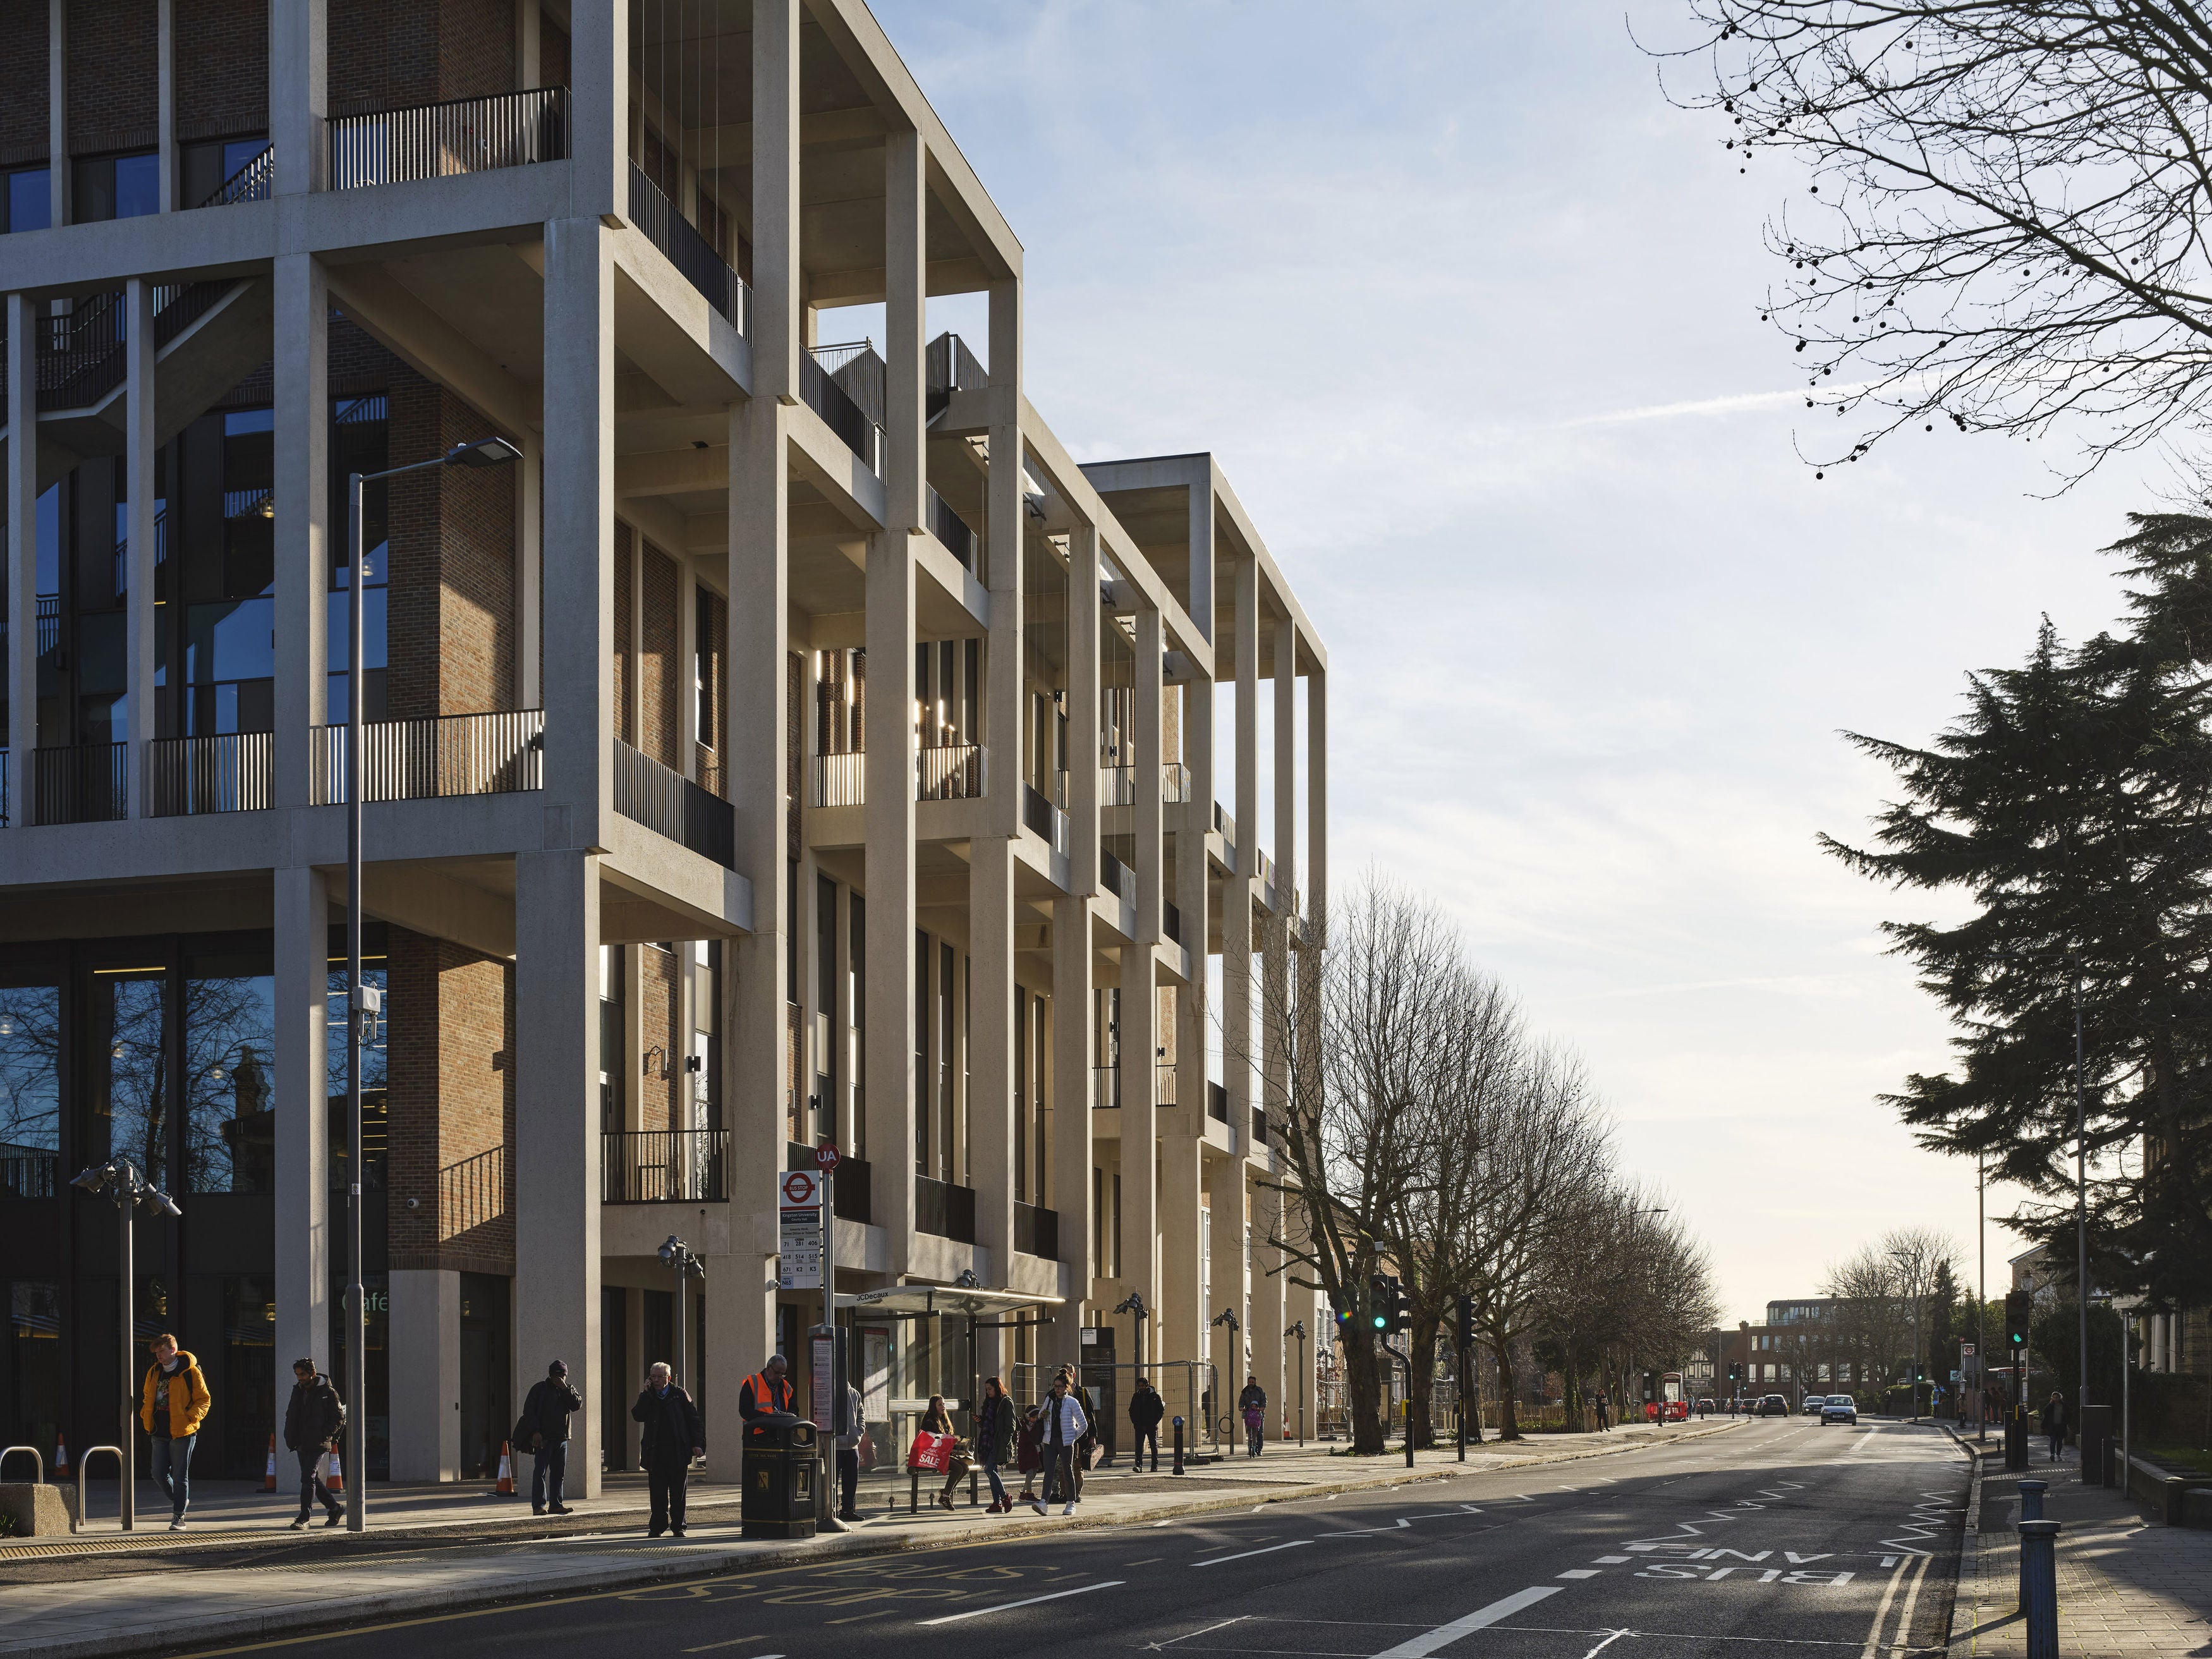 Kingston University Town House, which has been named as the winner of the 2021 RIBA Stirling Prize